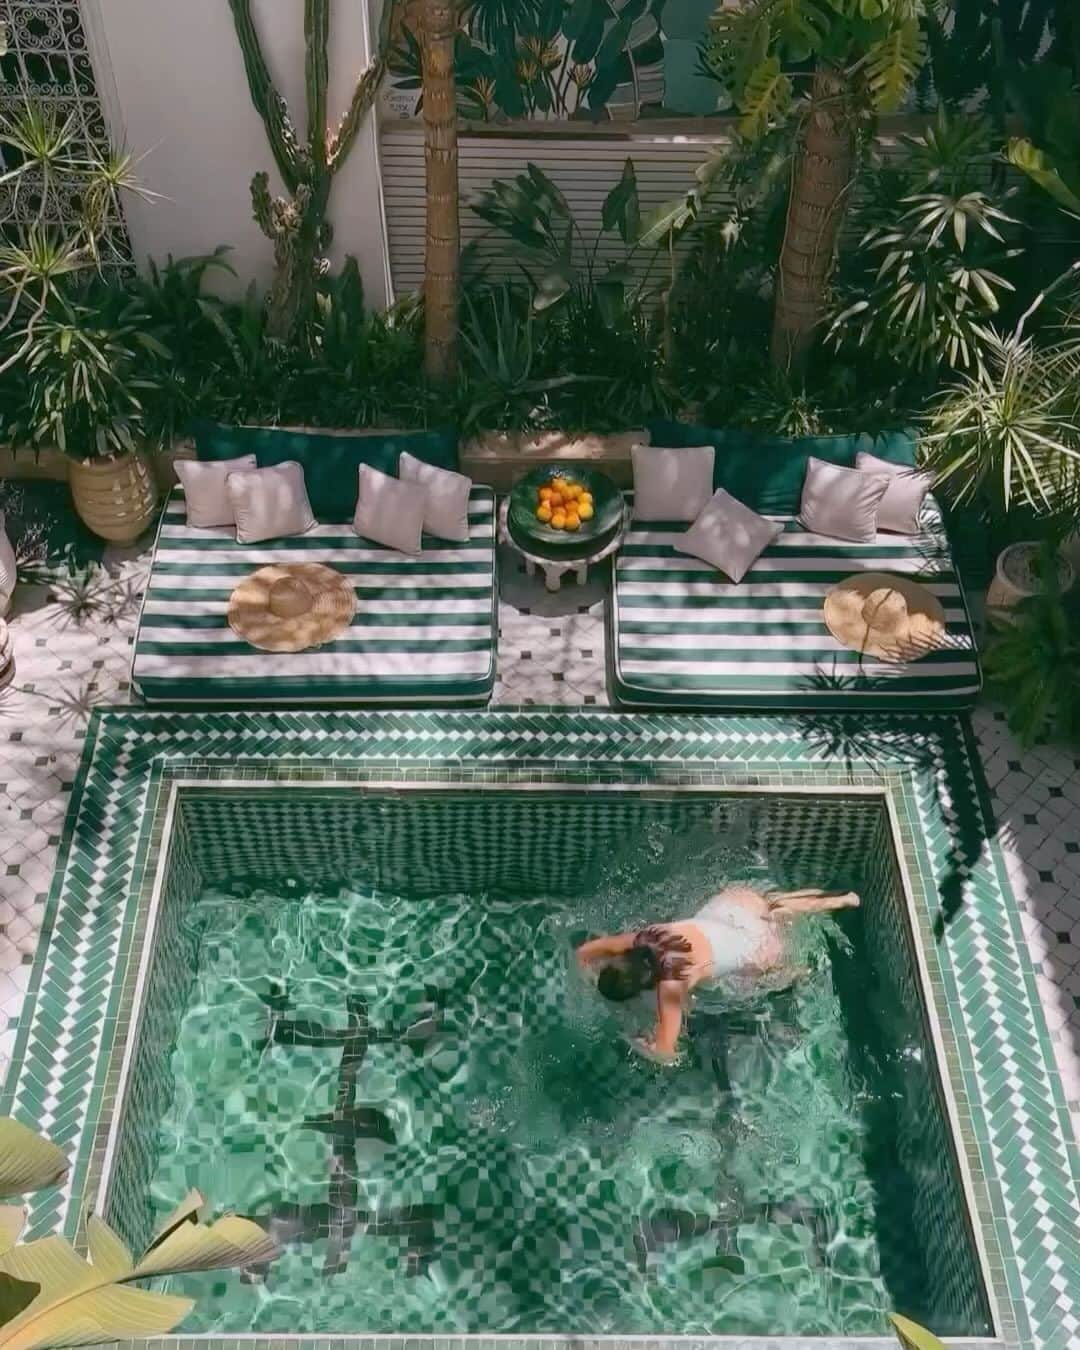 BEAUTIFUL HOTELSのインスタグラム：「Join @sabrina_diaries, @ananewyork, and @villatajmarrakech in the enchanting city of Marrakesh, where they take us around our three Bucket List Hotels - the beautiful Riad Yasmine, Nobu Marrakech and Villa Taj Marrakech. 🇲🇦 Perfect for unwinding after a day exploring the bustling medina and city! 🌟  1️⃣ Riad Yasmine by @sabrina_diaries 2️⃣ Nobu Marrakech by @ananewyork 3️⃣ Villa Taj Marrakech by @villatajmarrakech  📍 Marrakesh, Morocco 🎶 Francis Lai, Nicole Croisille, Pierre Barouh - Un Homme Et Une Femme」